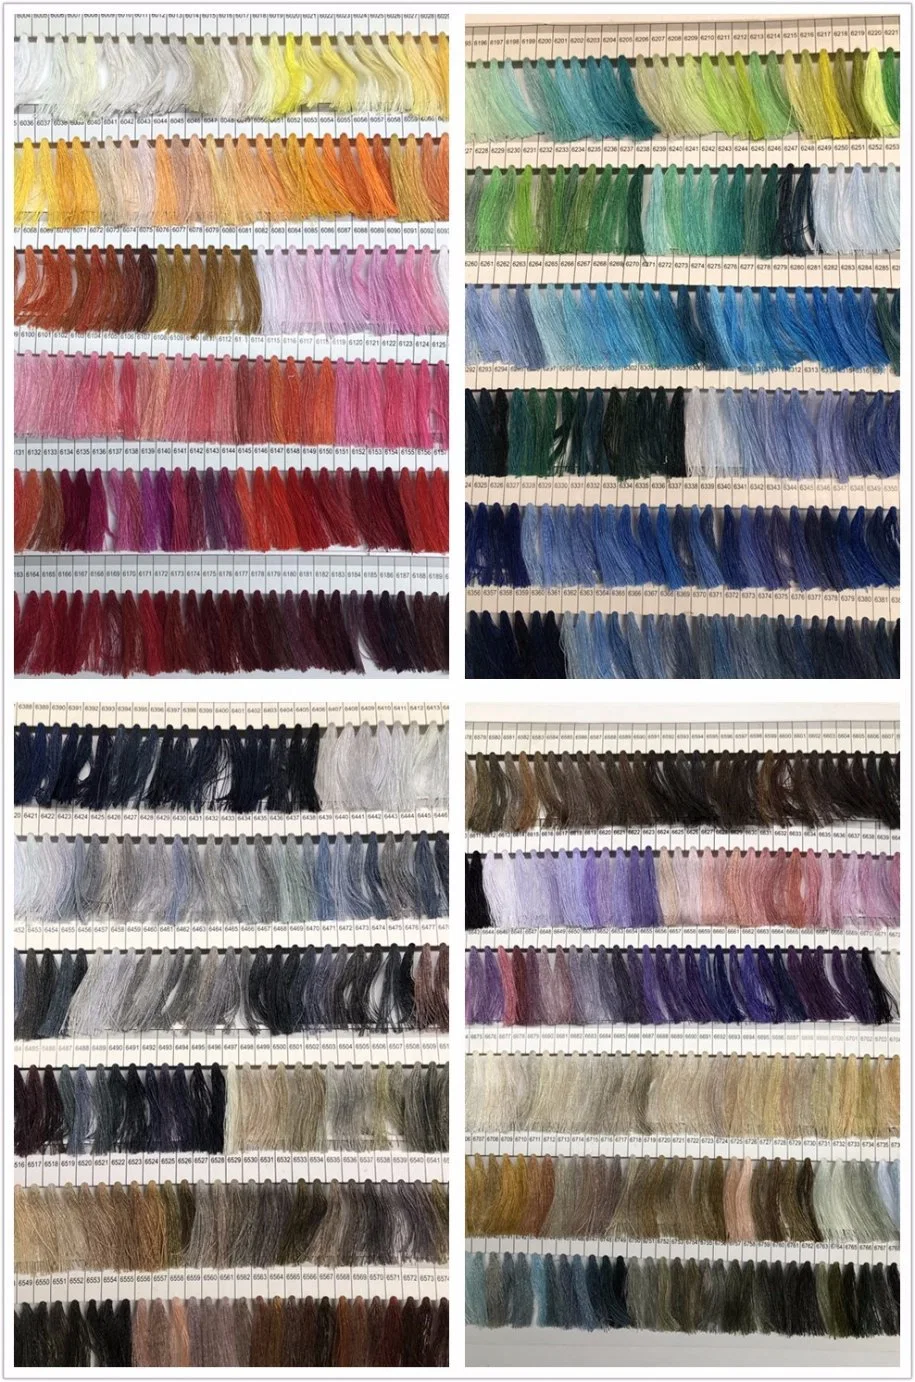 Dyed 100% Tfo Polyester Spun Textile Yarn Sewing Thread From 20s to 60s